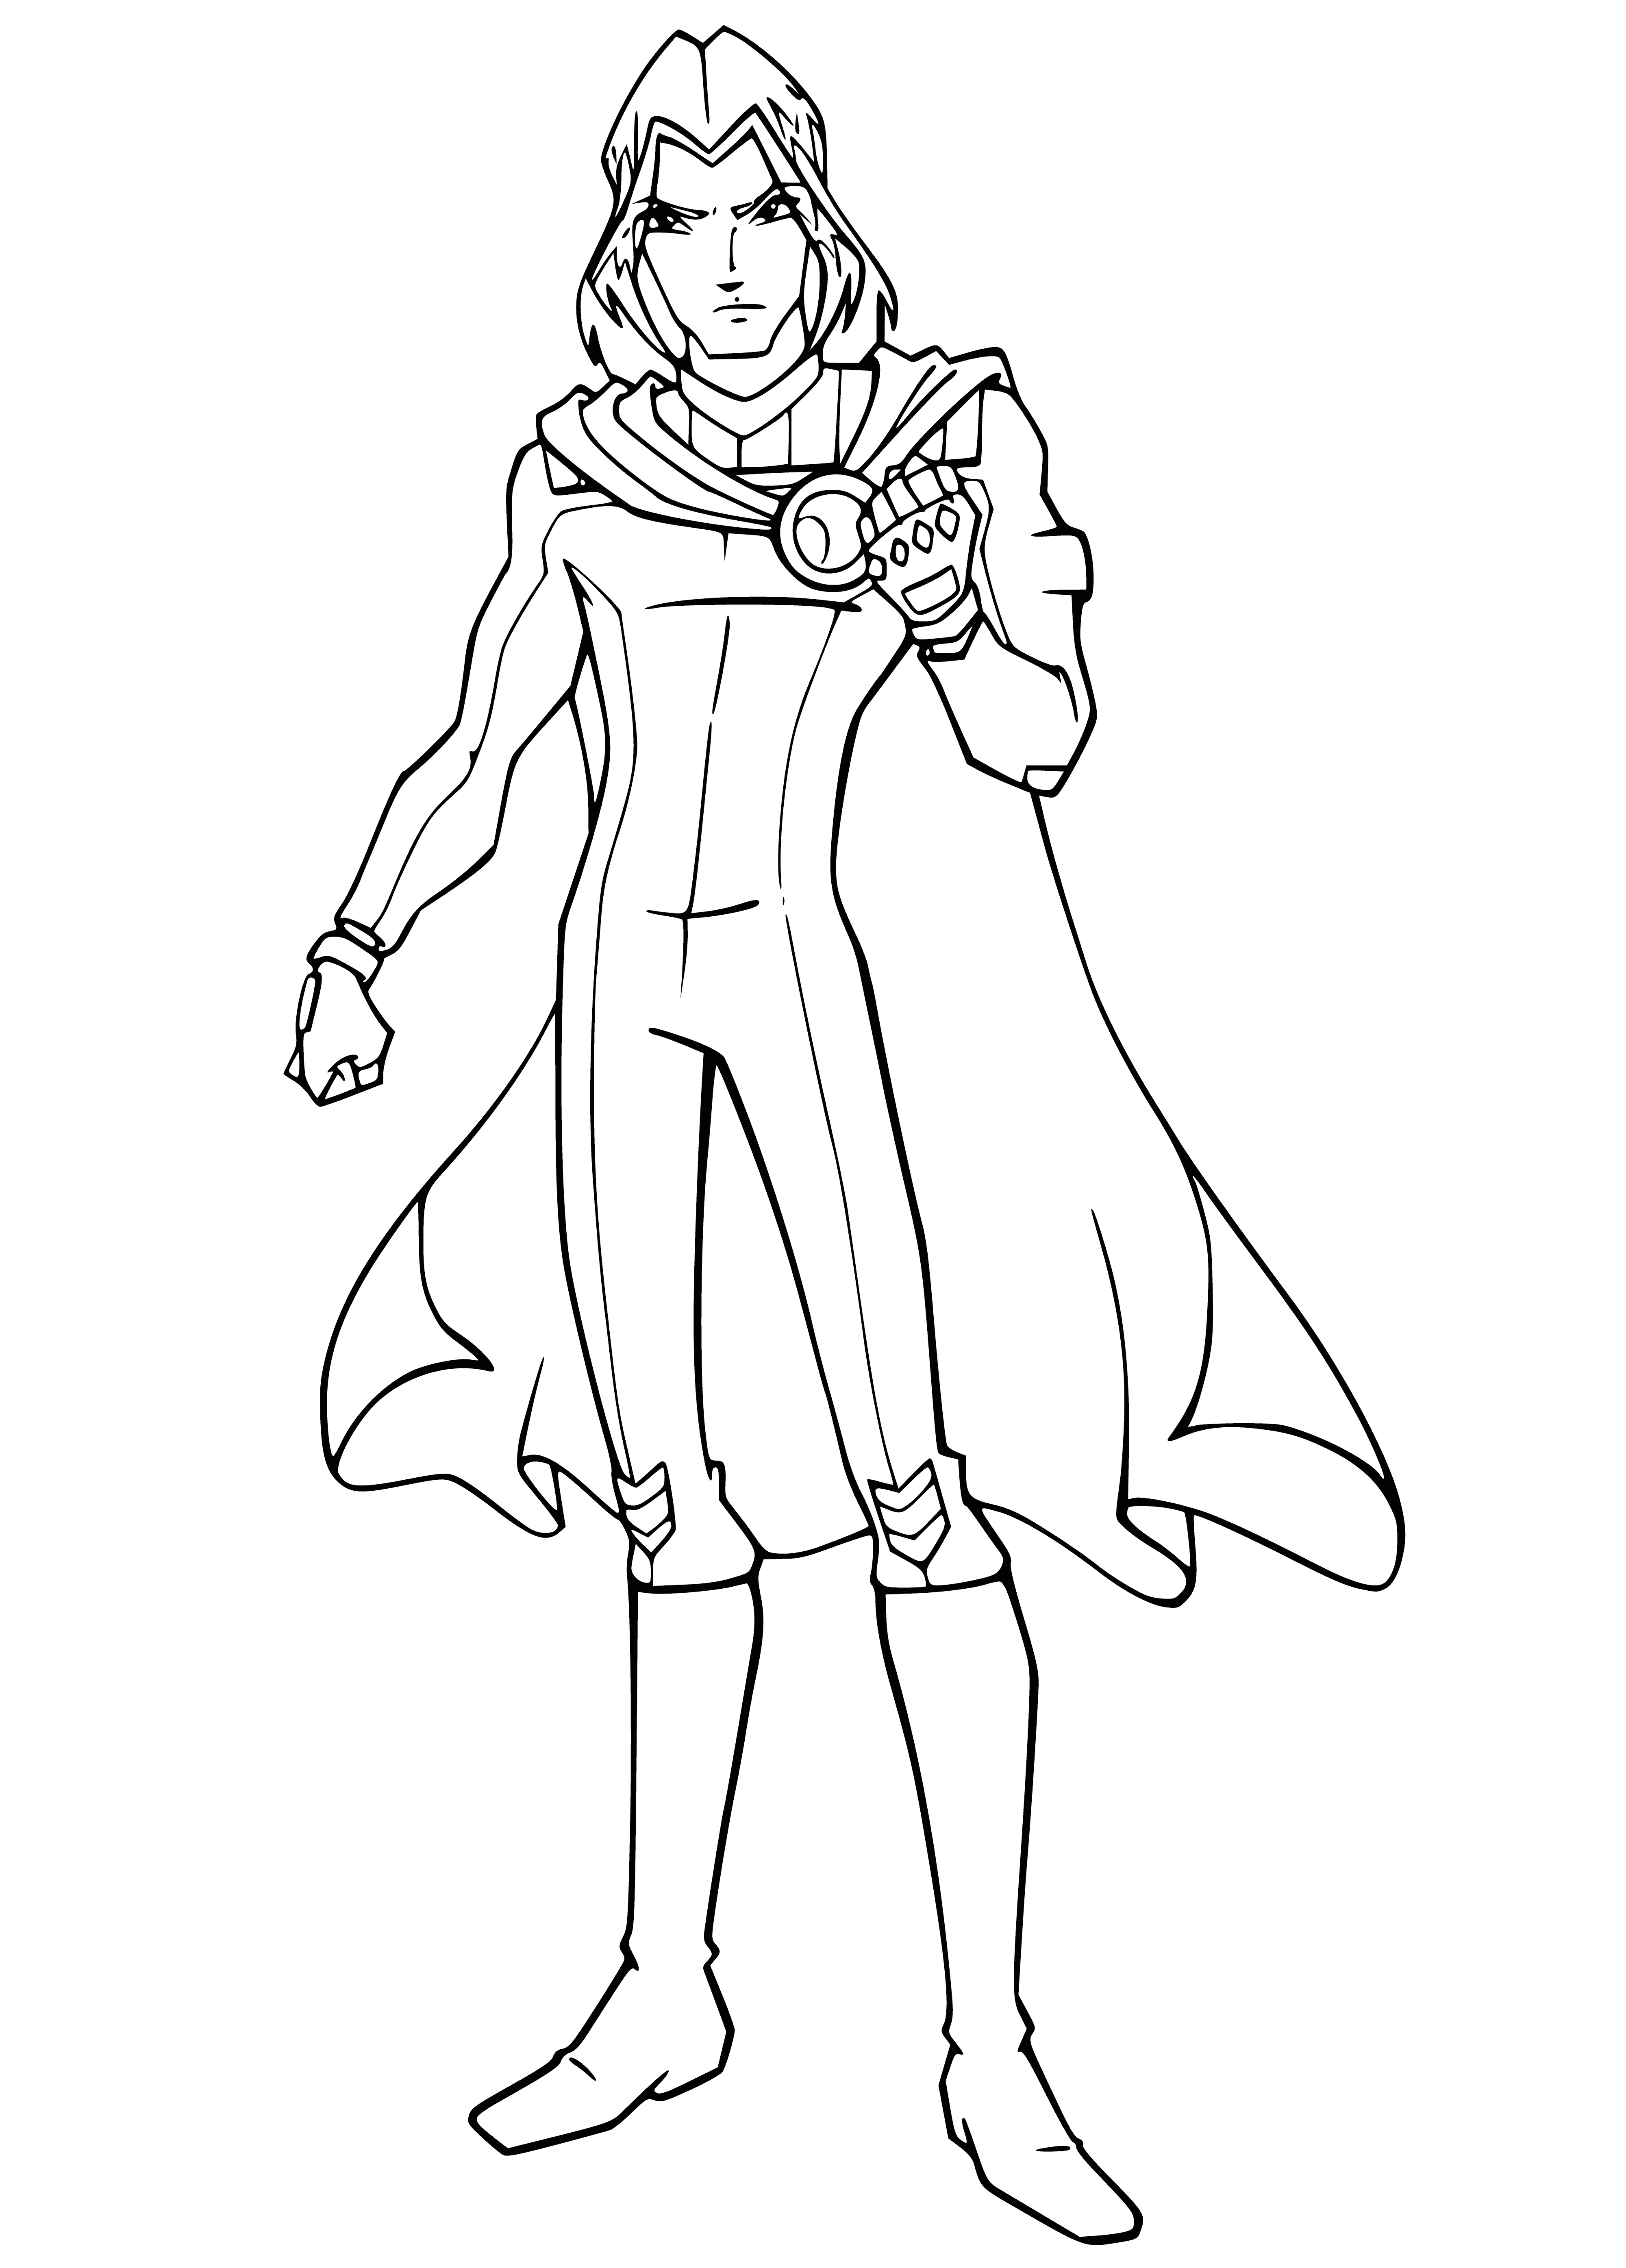 coloring page: Skye is a noble warrior-king who cares deeply for his people & puts their needs first. A master of strategy and talented singer/songwriter.